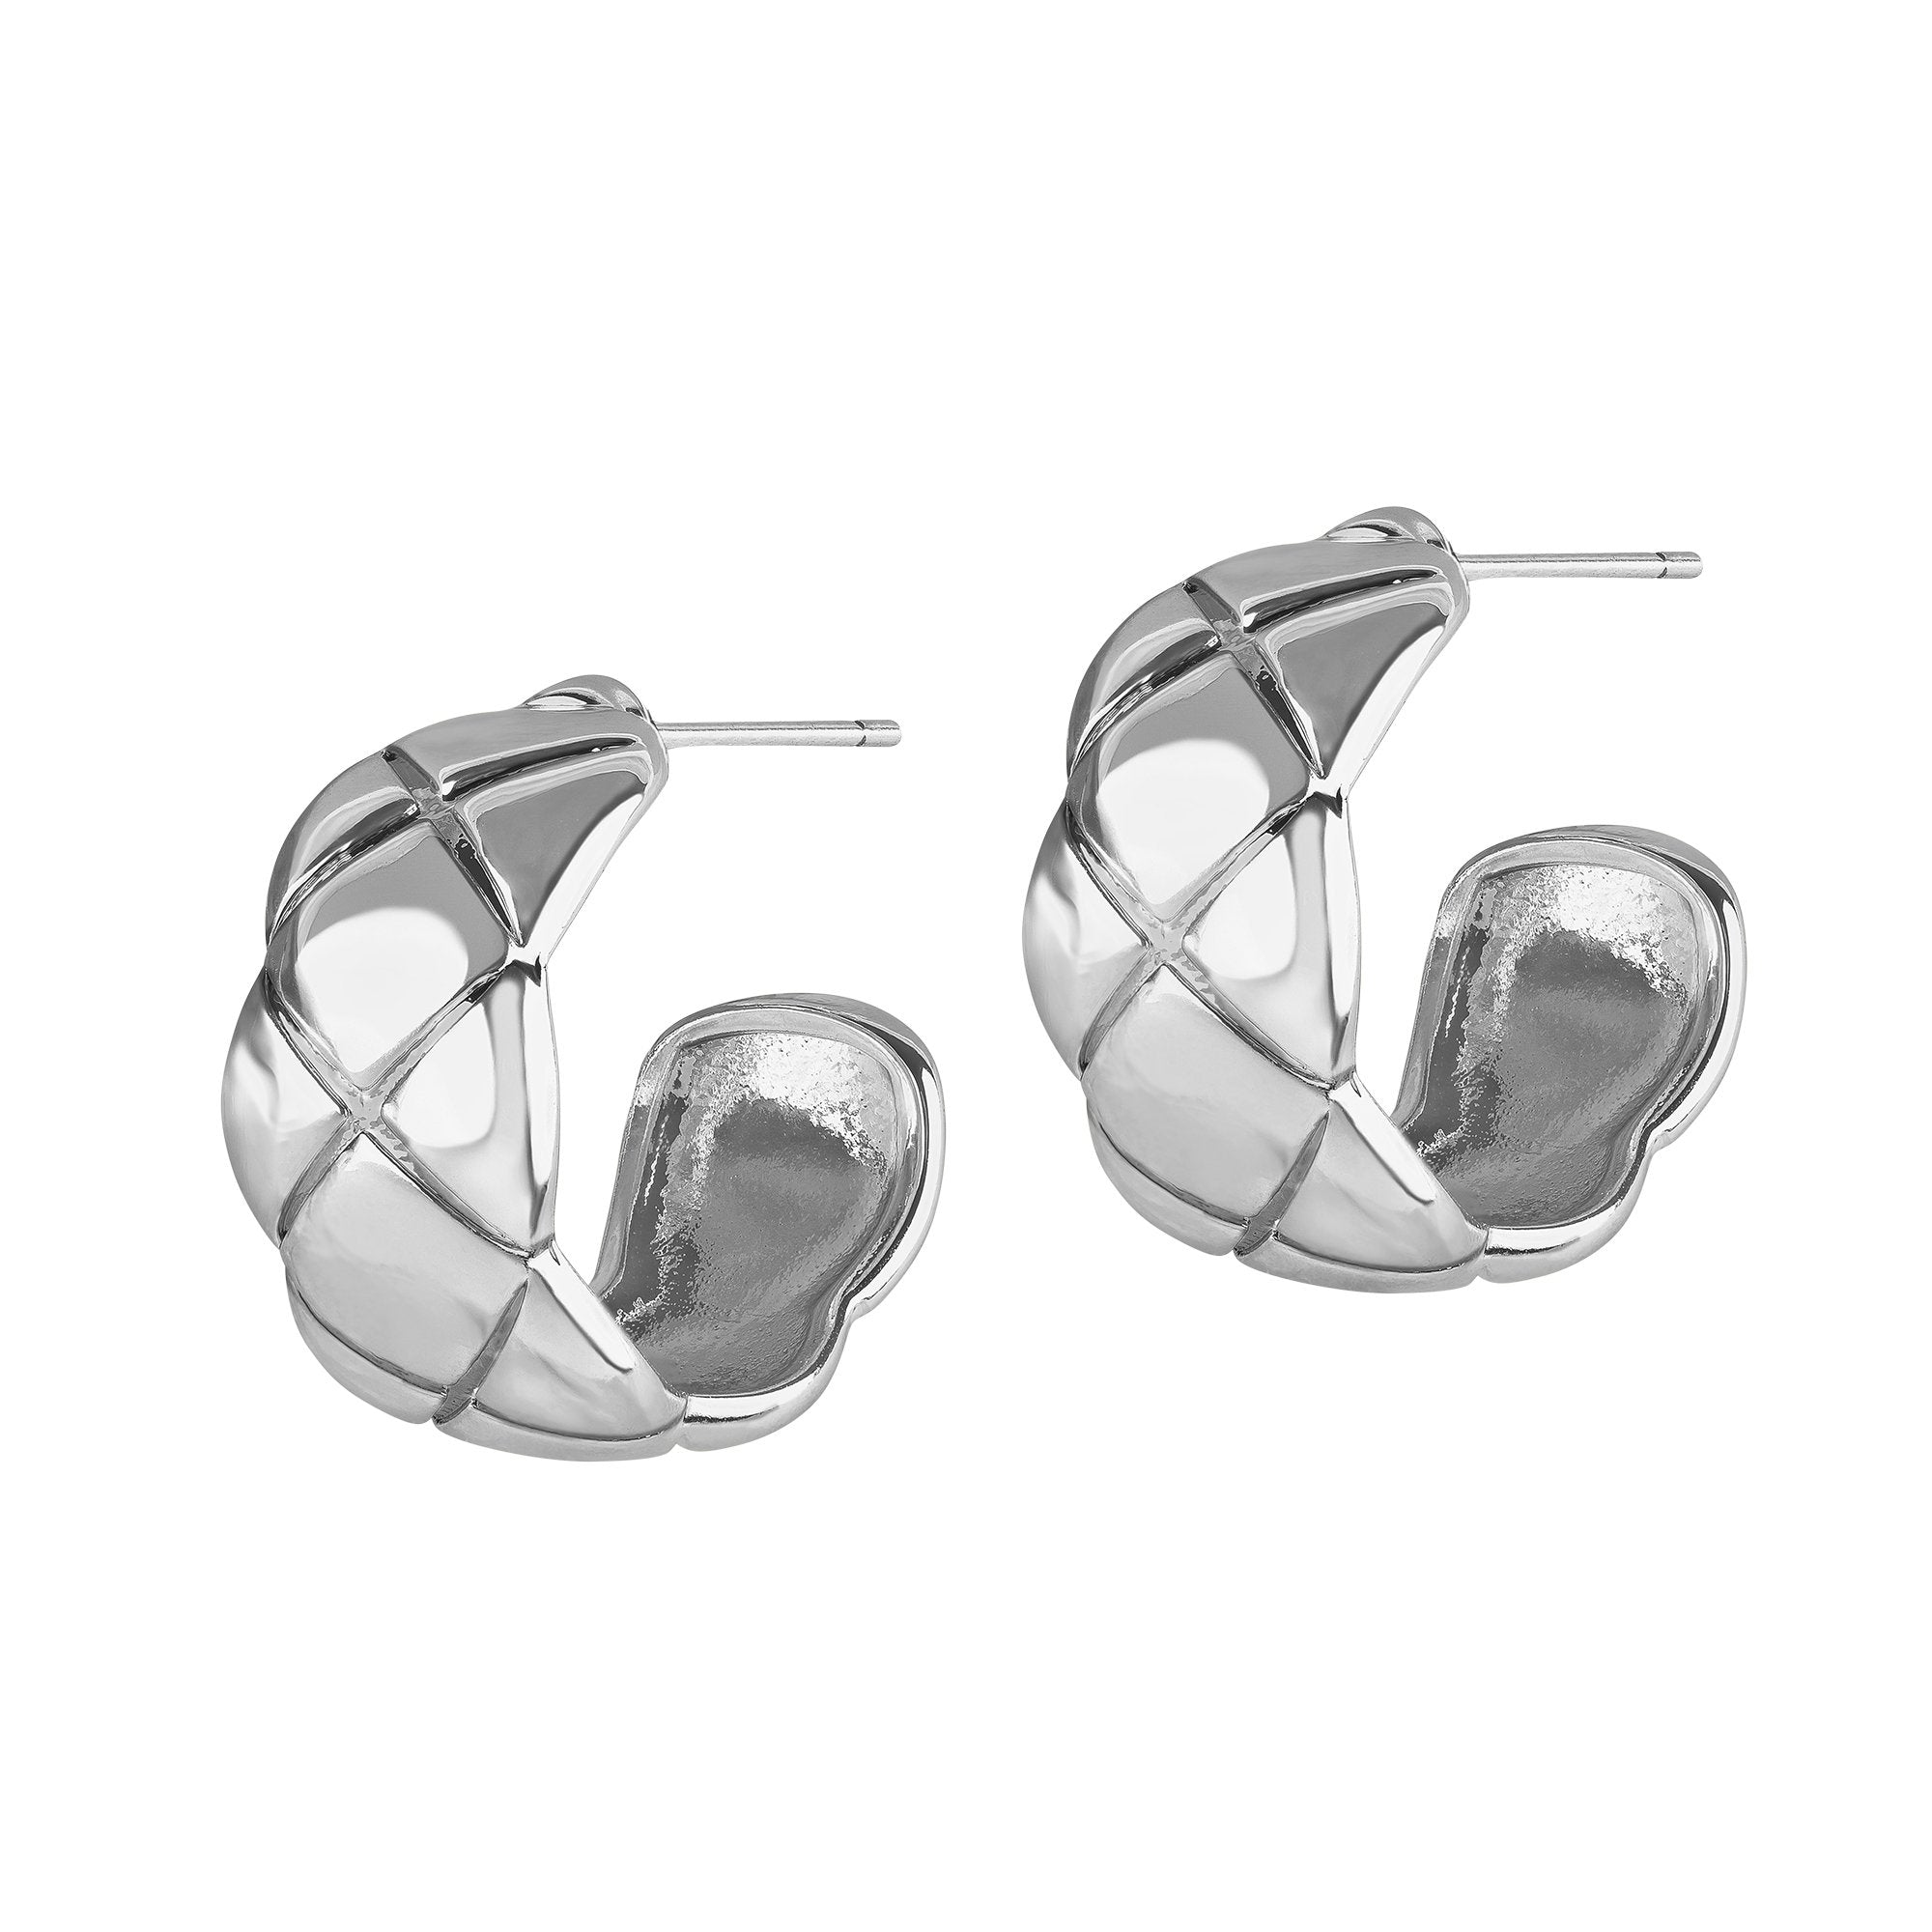 The Coco Hoops in Silver